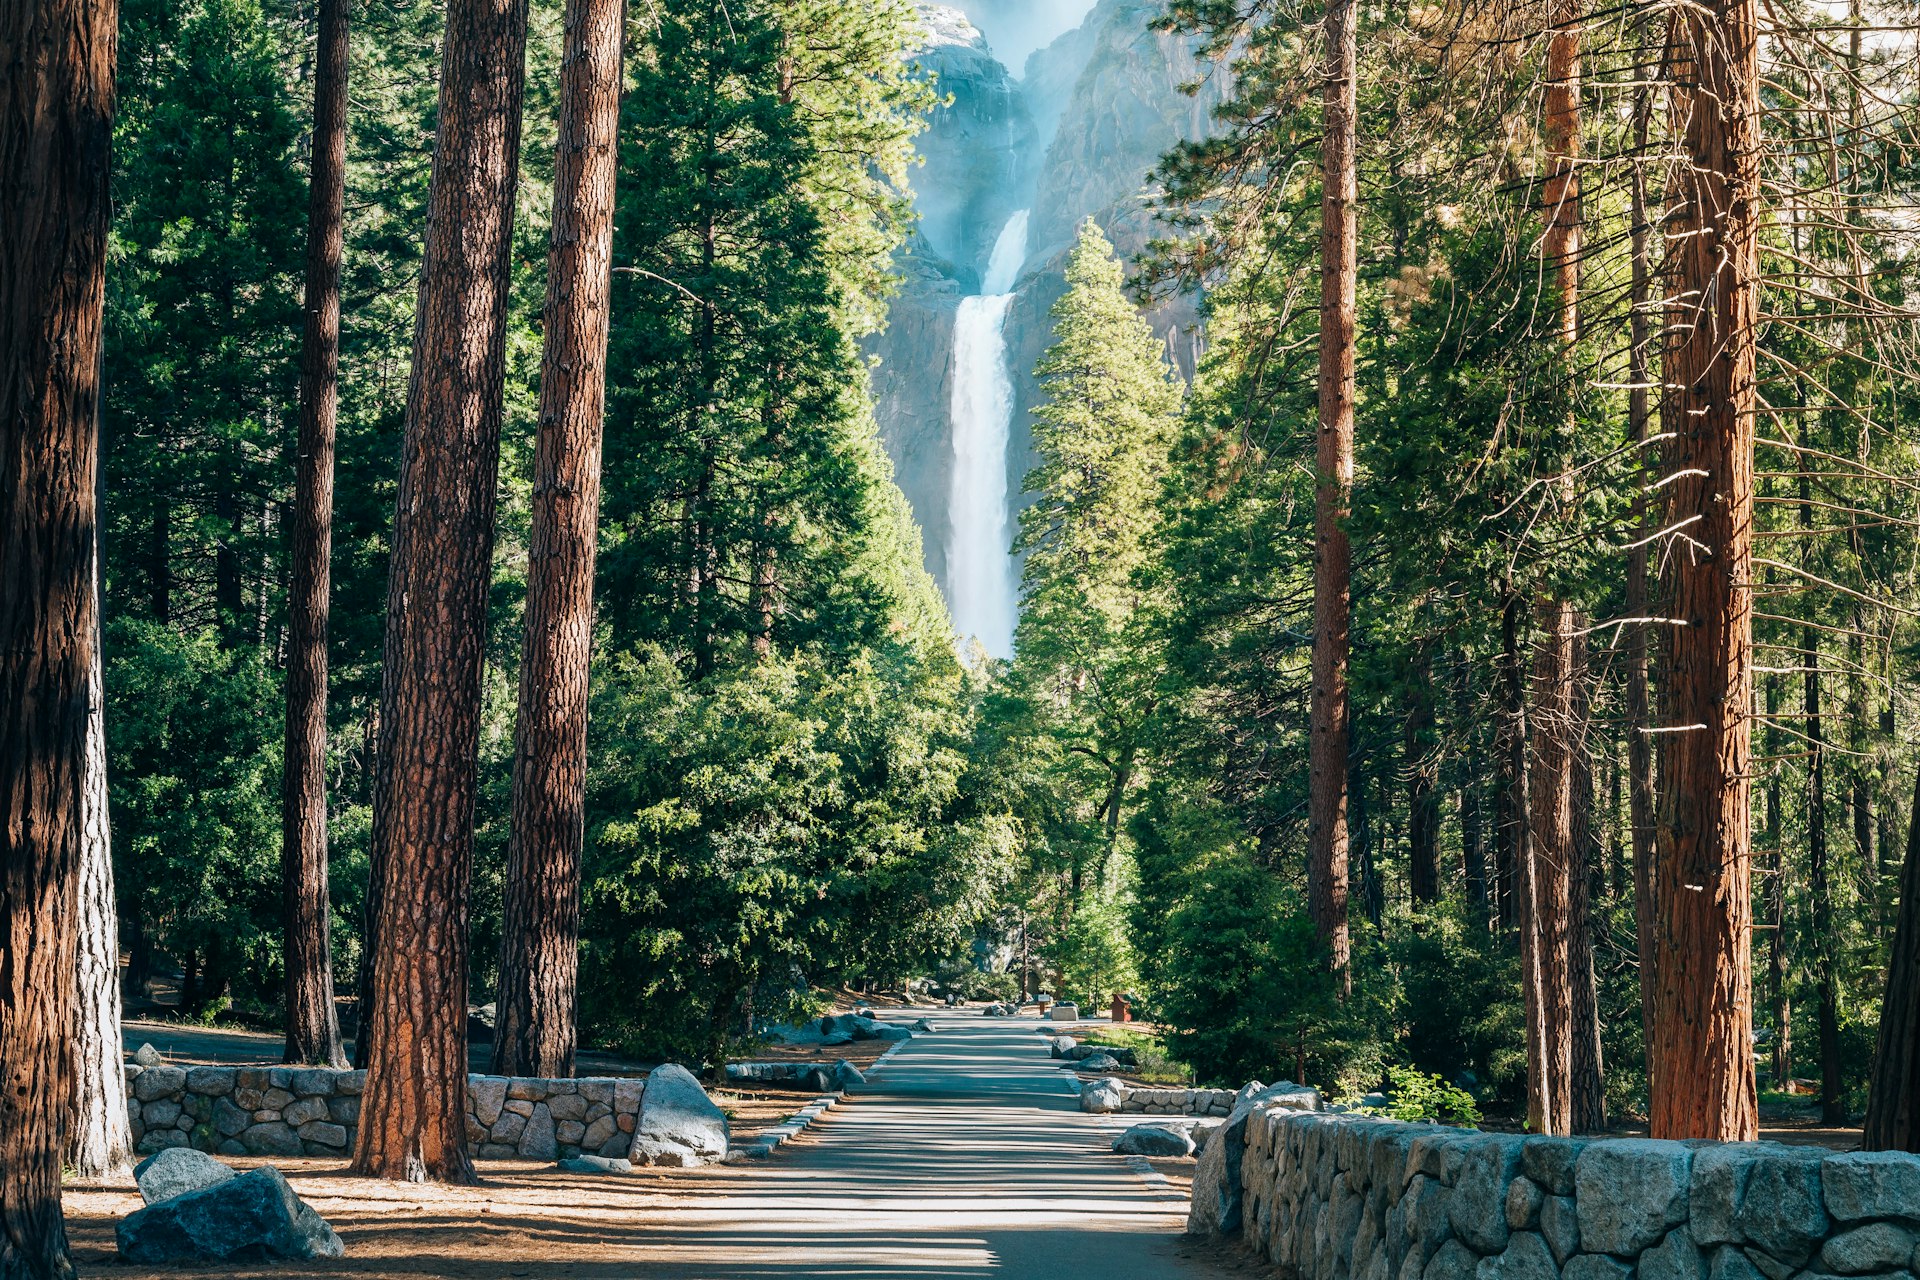 A forest view in Yosemite